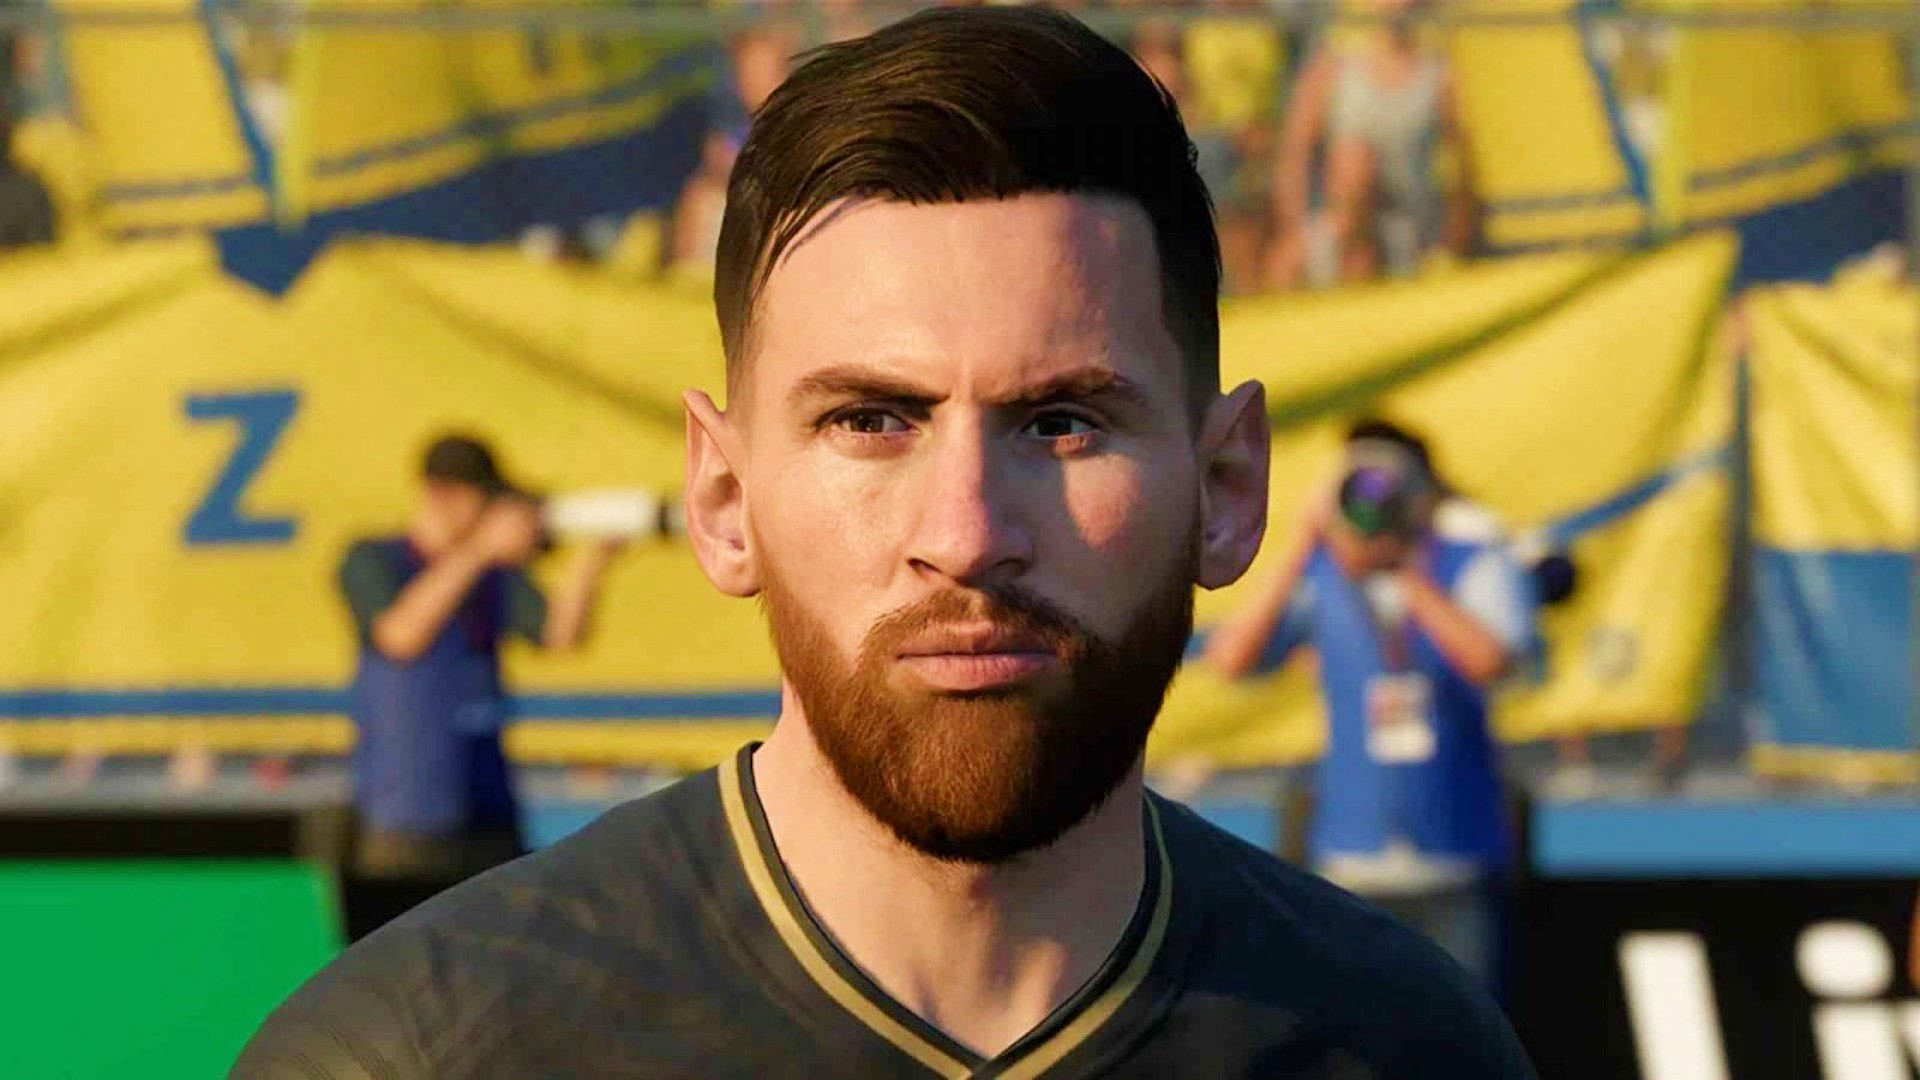 FIFA 23 and EA eerily predict World Cup final and Messi accolades